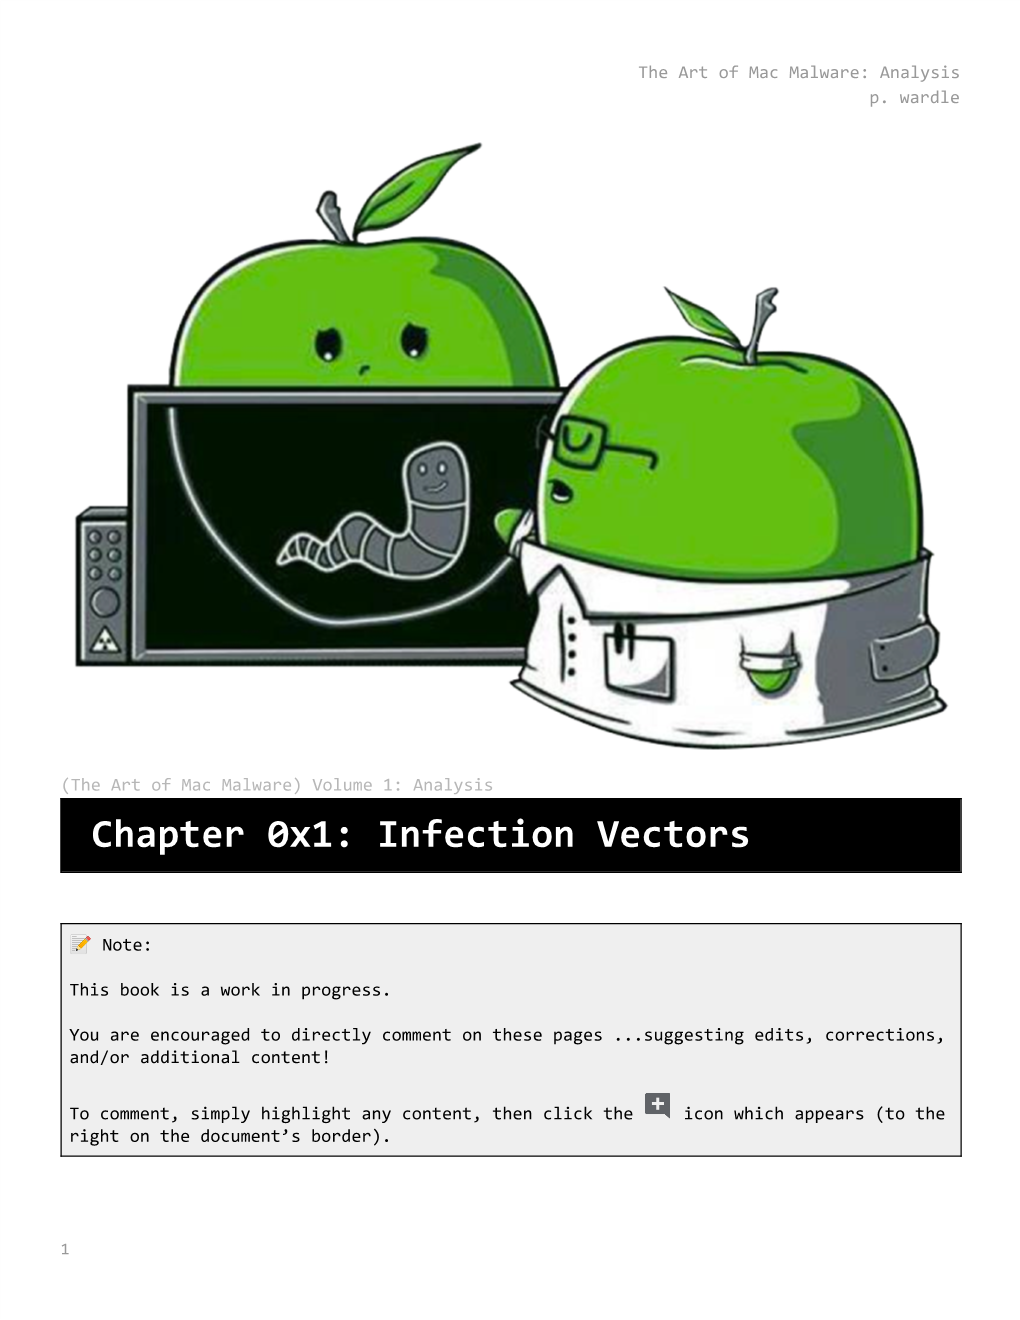 Chapter 0X1: Infection Vectors